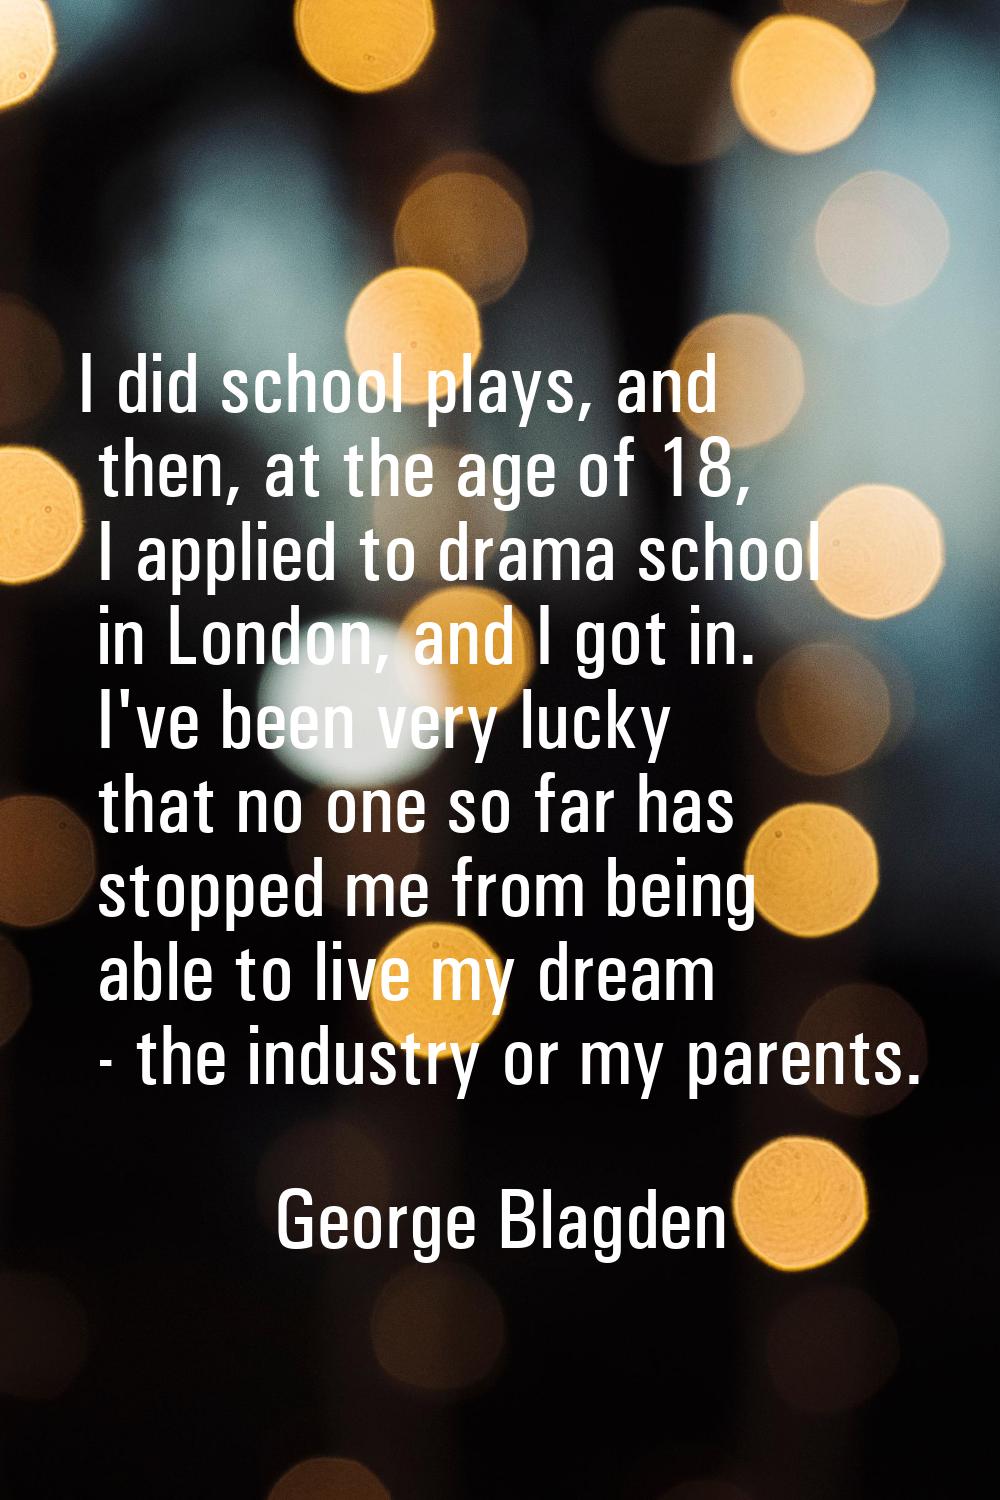 I did school plays, and then, at the age of 18, I applied to drama school in London, and I got in. 